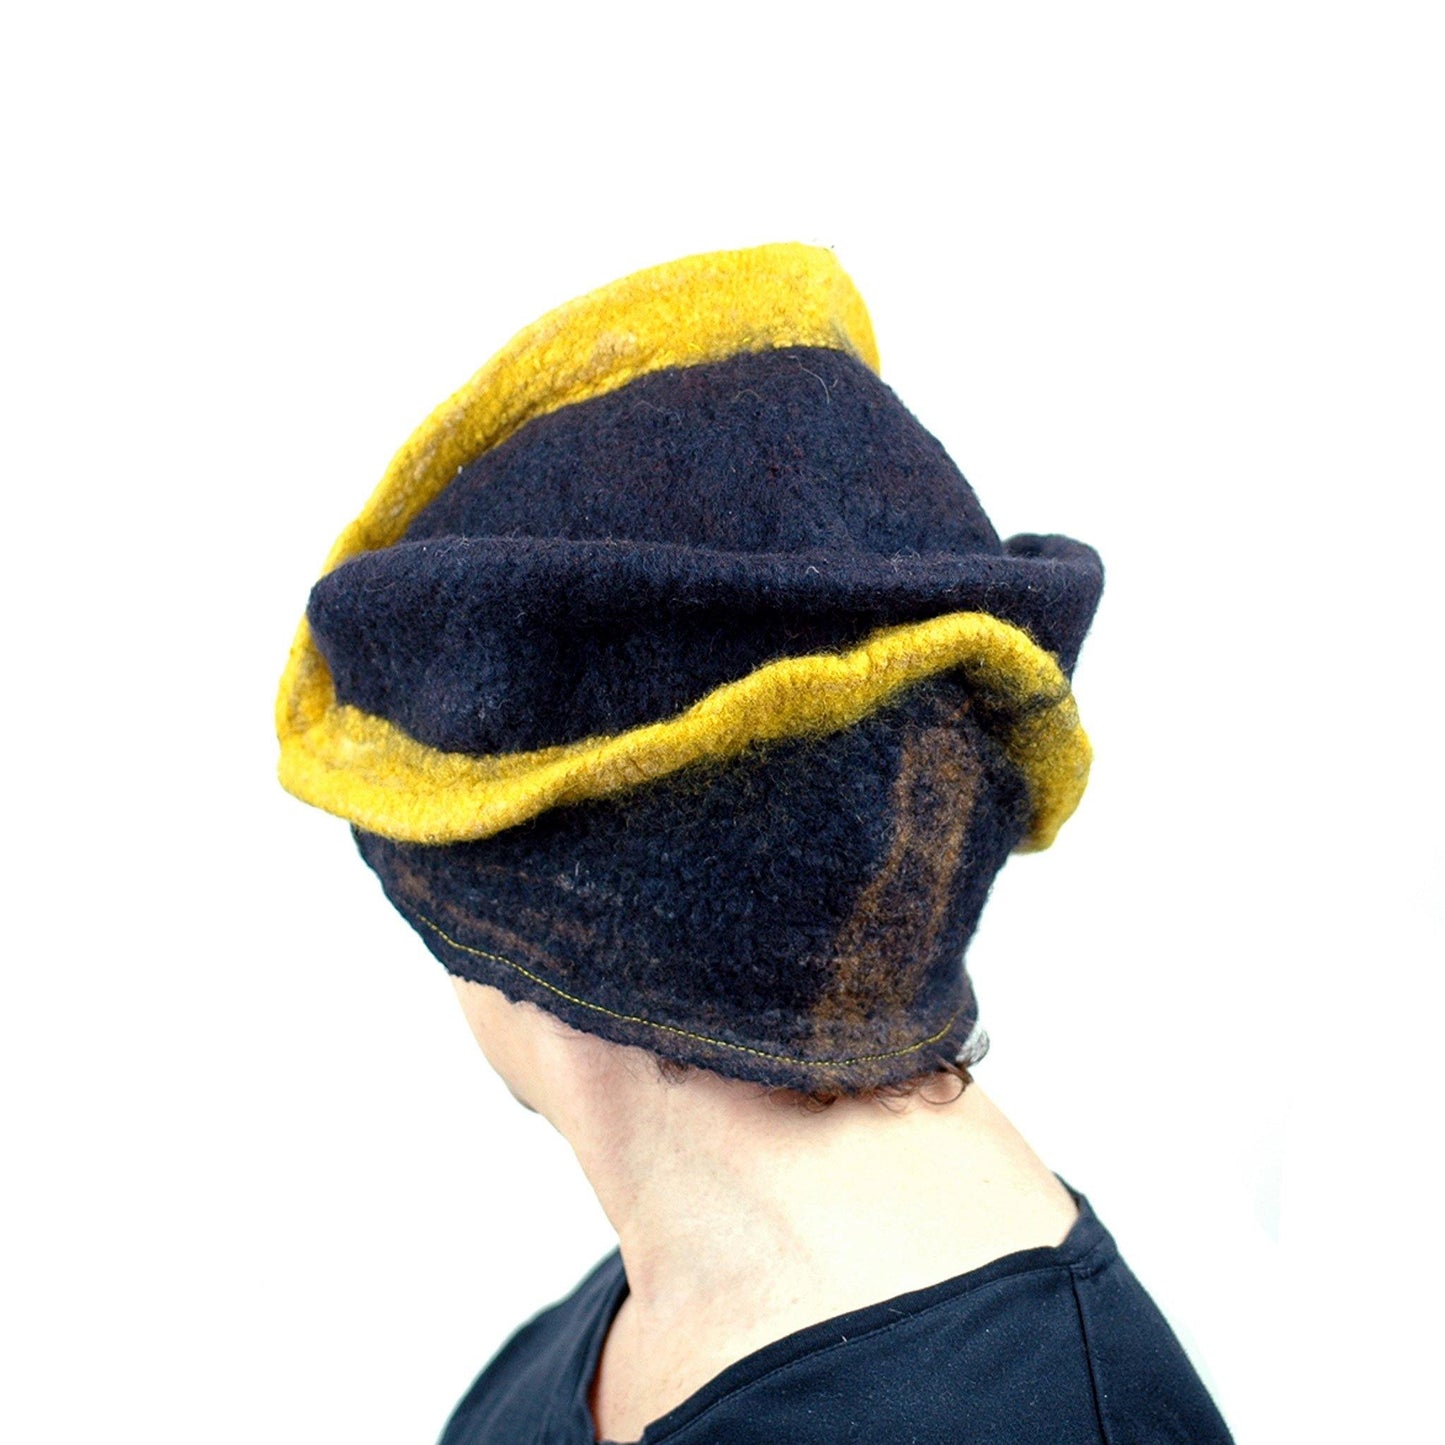 Black and Gold Wizard Hat for Pittsburgh or Hufflepuff Fans -back view